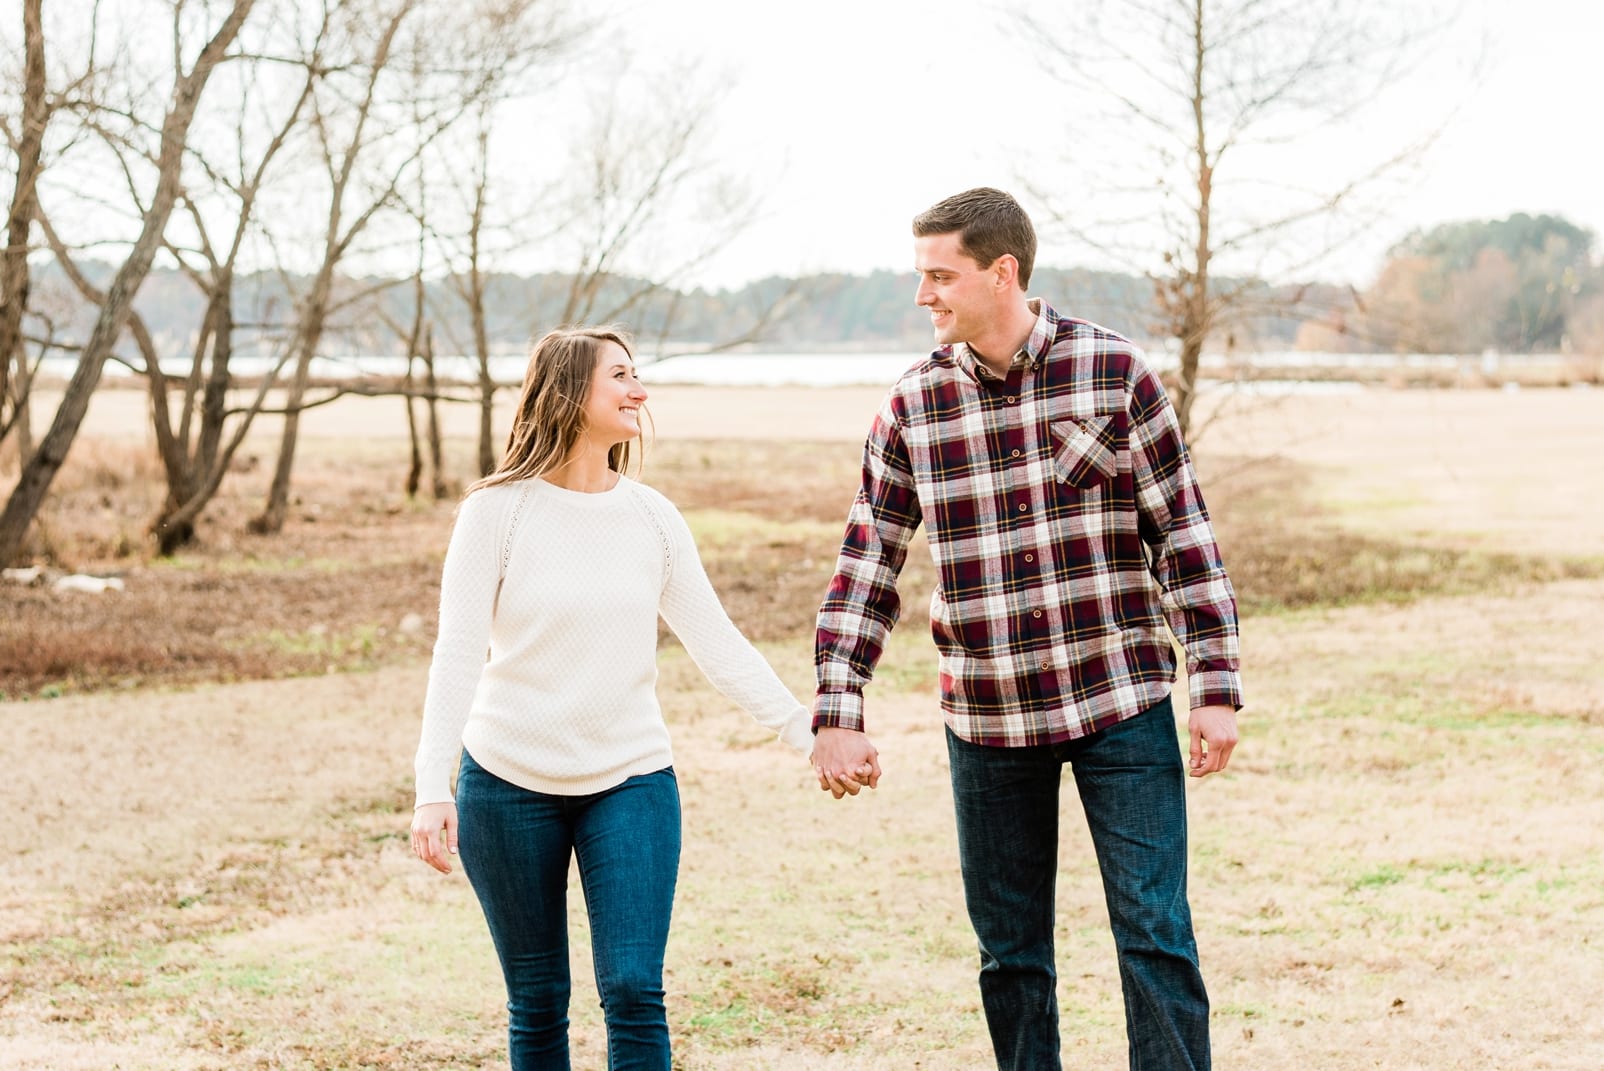 Raleigh couple holding hands and looking at each other while walking photo